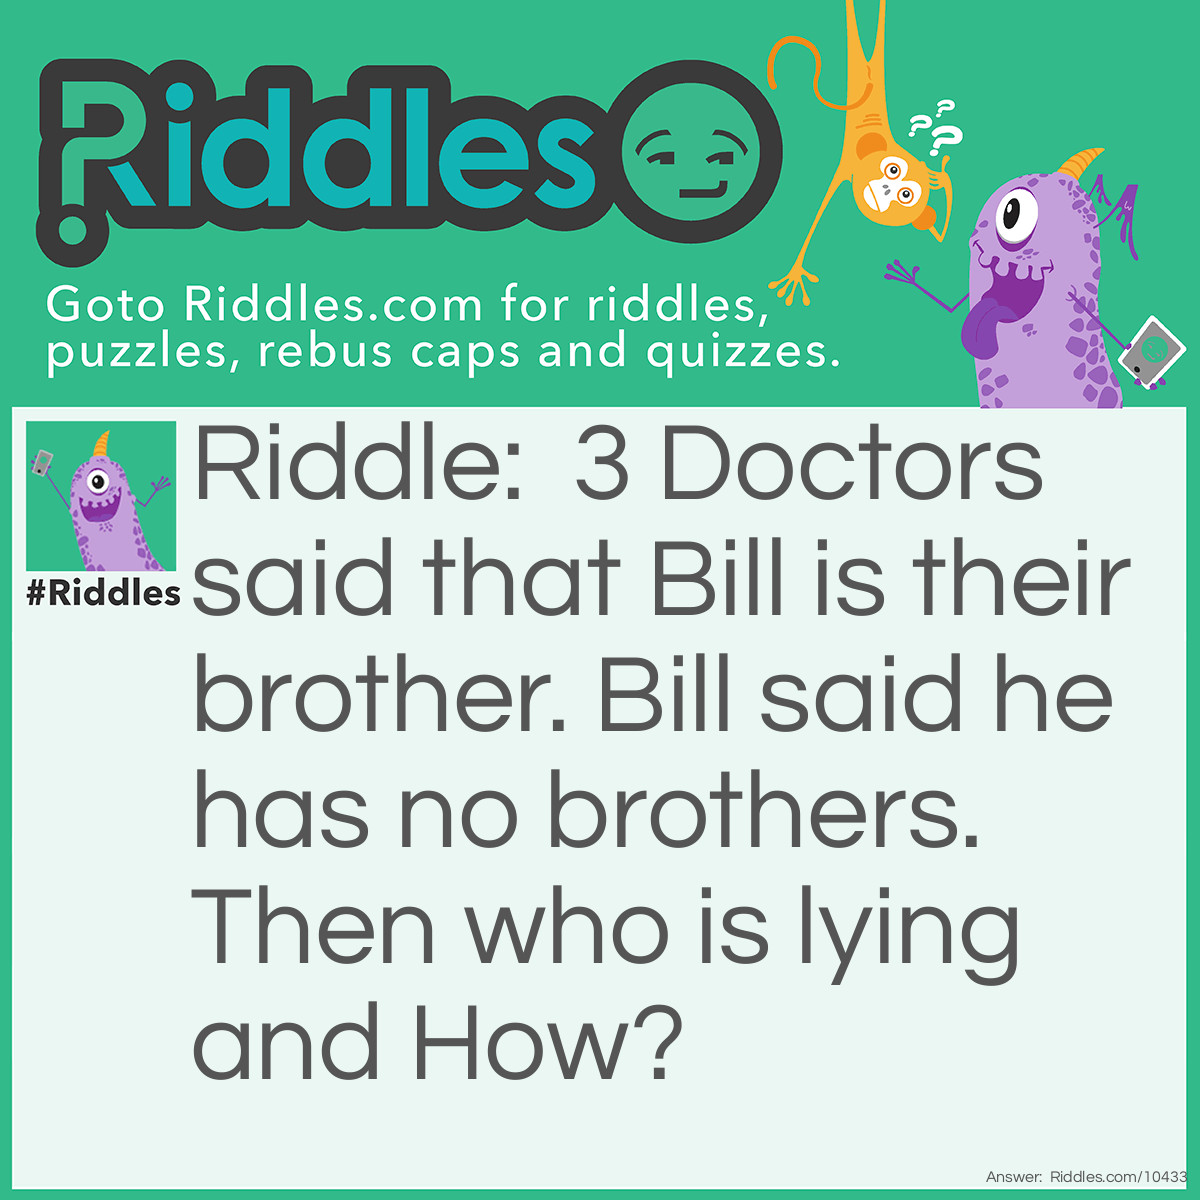 Riddle: 3 Doctors said that Bill is their brother. Bill said he has no brothers. Then who is lying and How? Answer: No One as the 3 doctors are Bill's sister